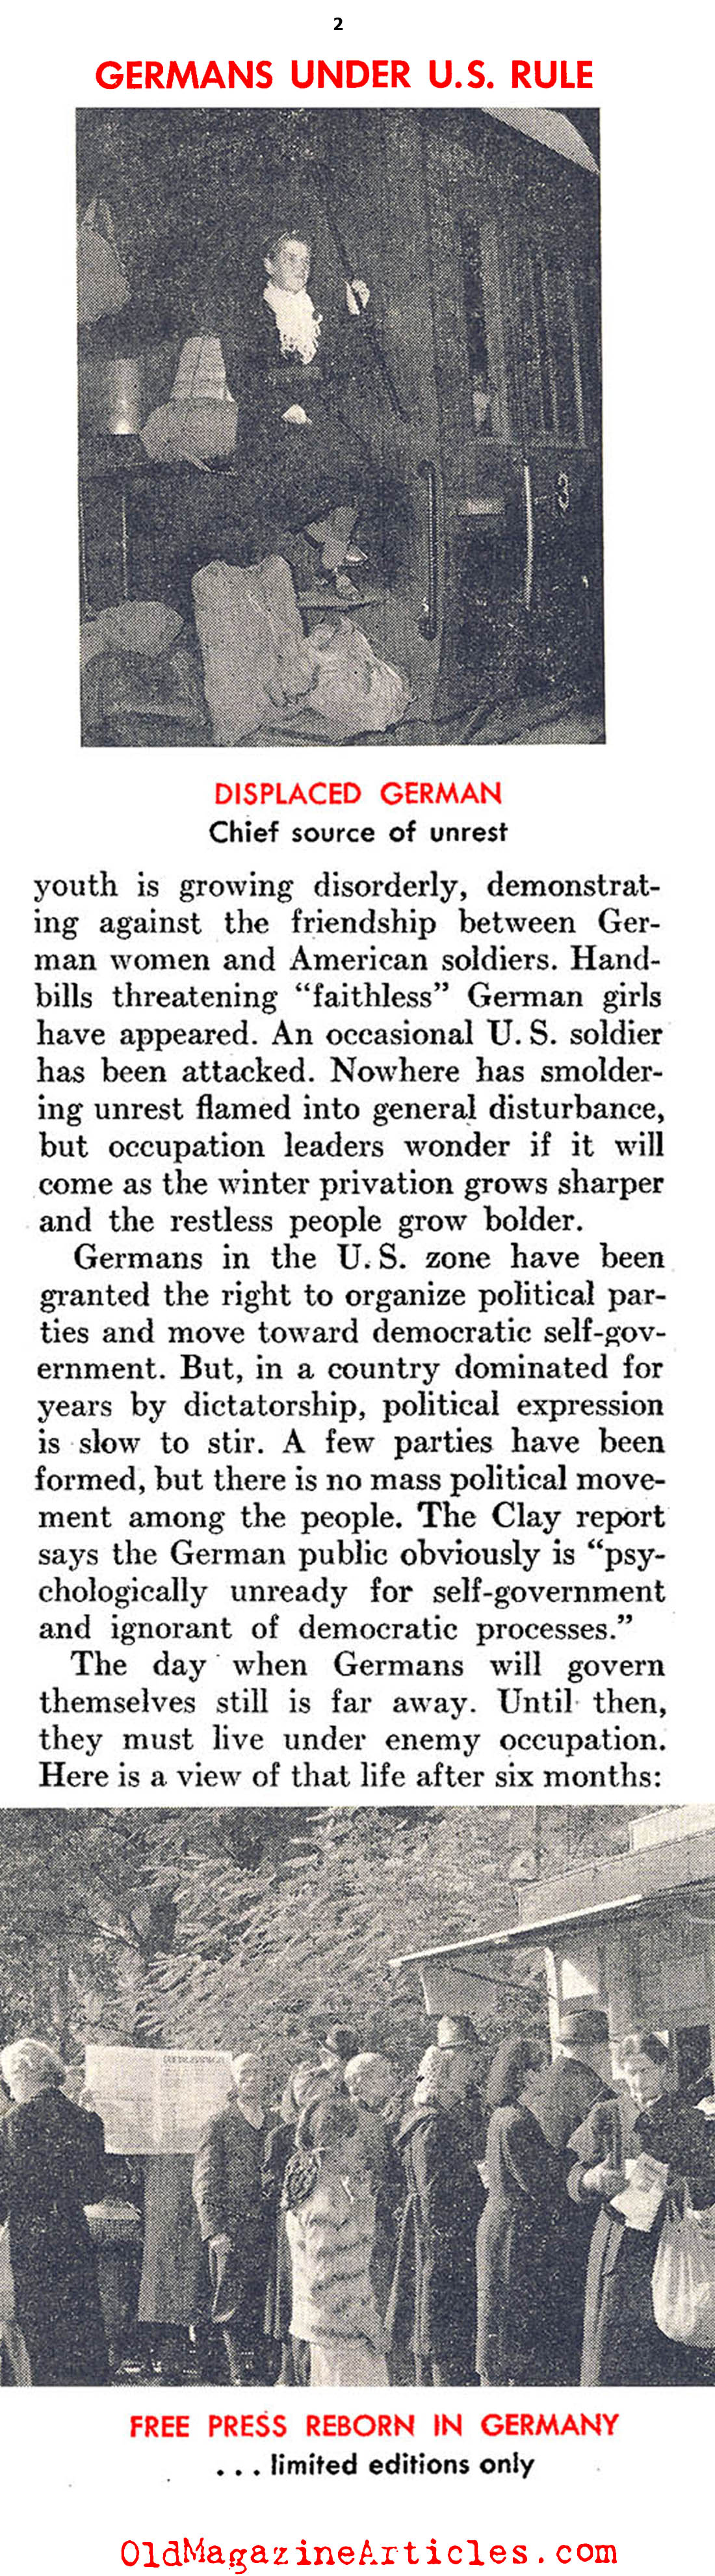 The American Sector (United States News, 1945)